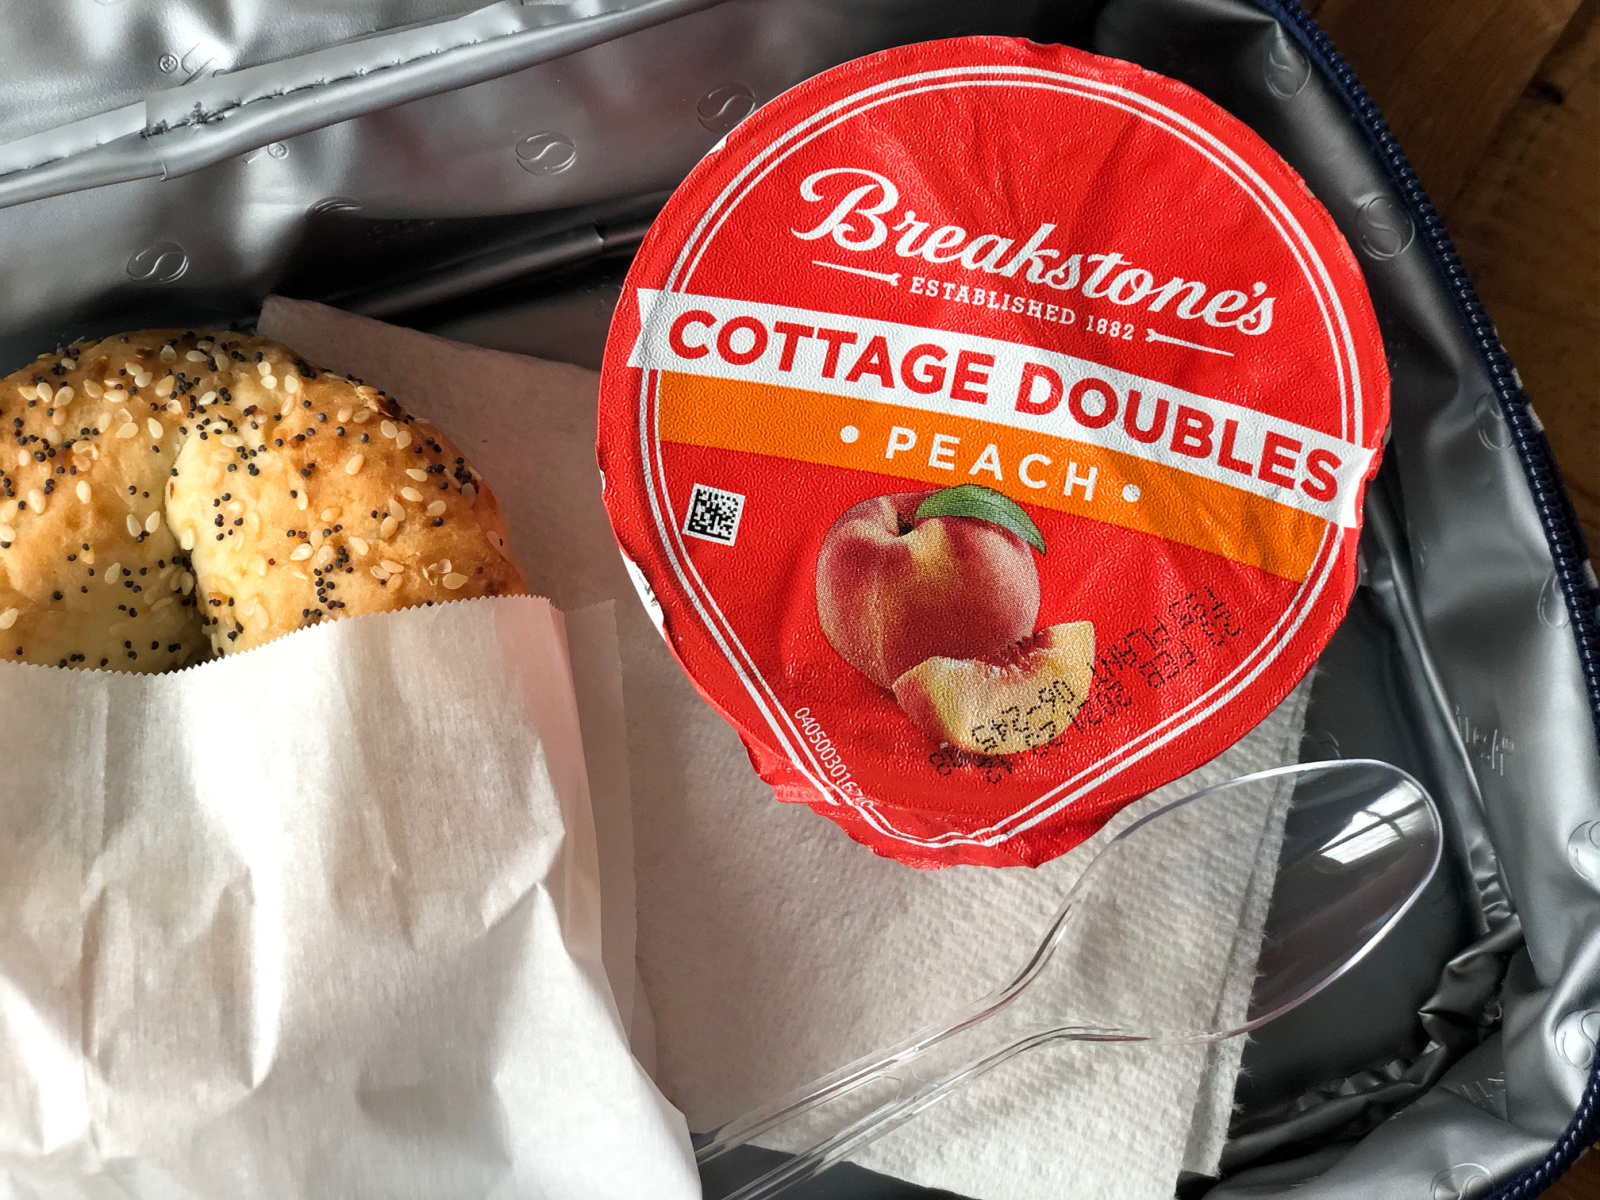 Scrumptious Snacking Made Easy - Breakstone’s Cottage Doubles Are On Sale 5/$5 At Publix on I Heart Publix 3